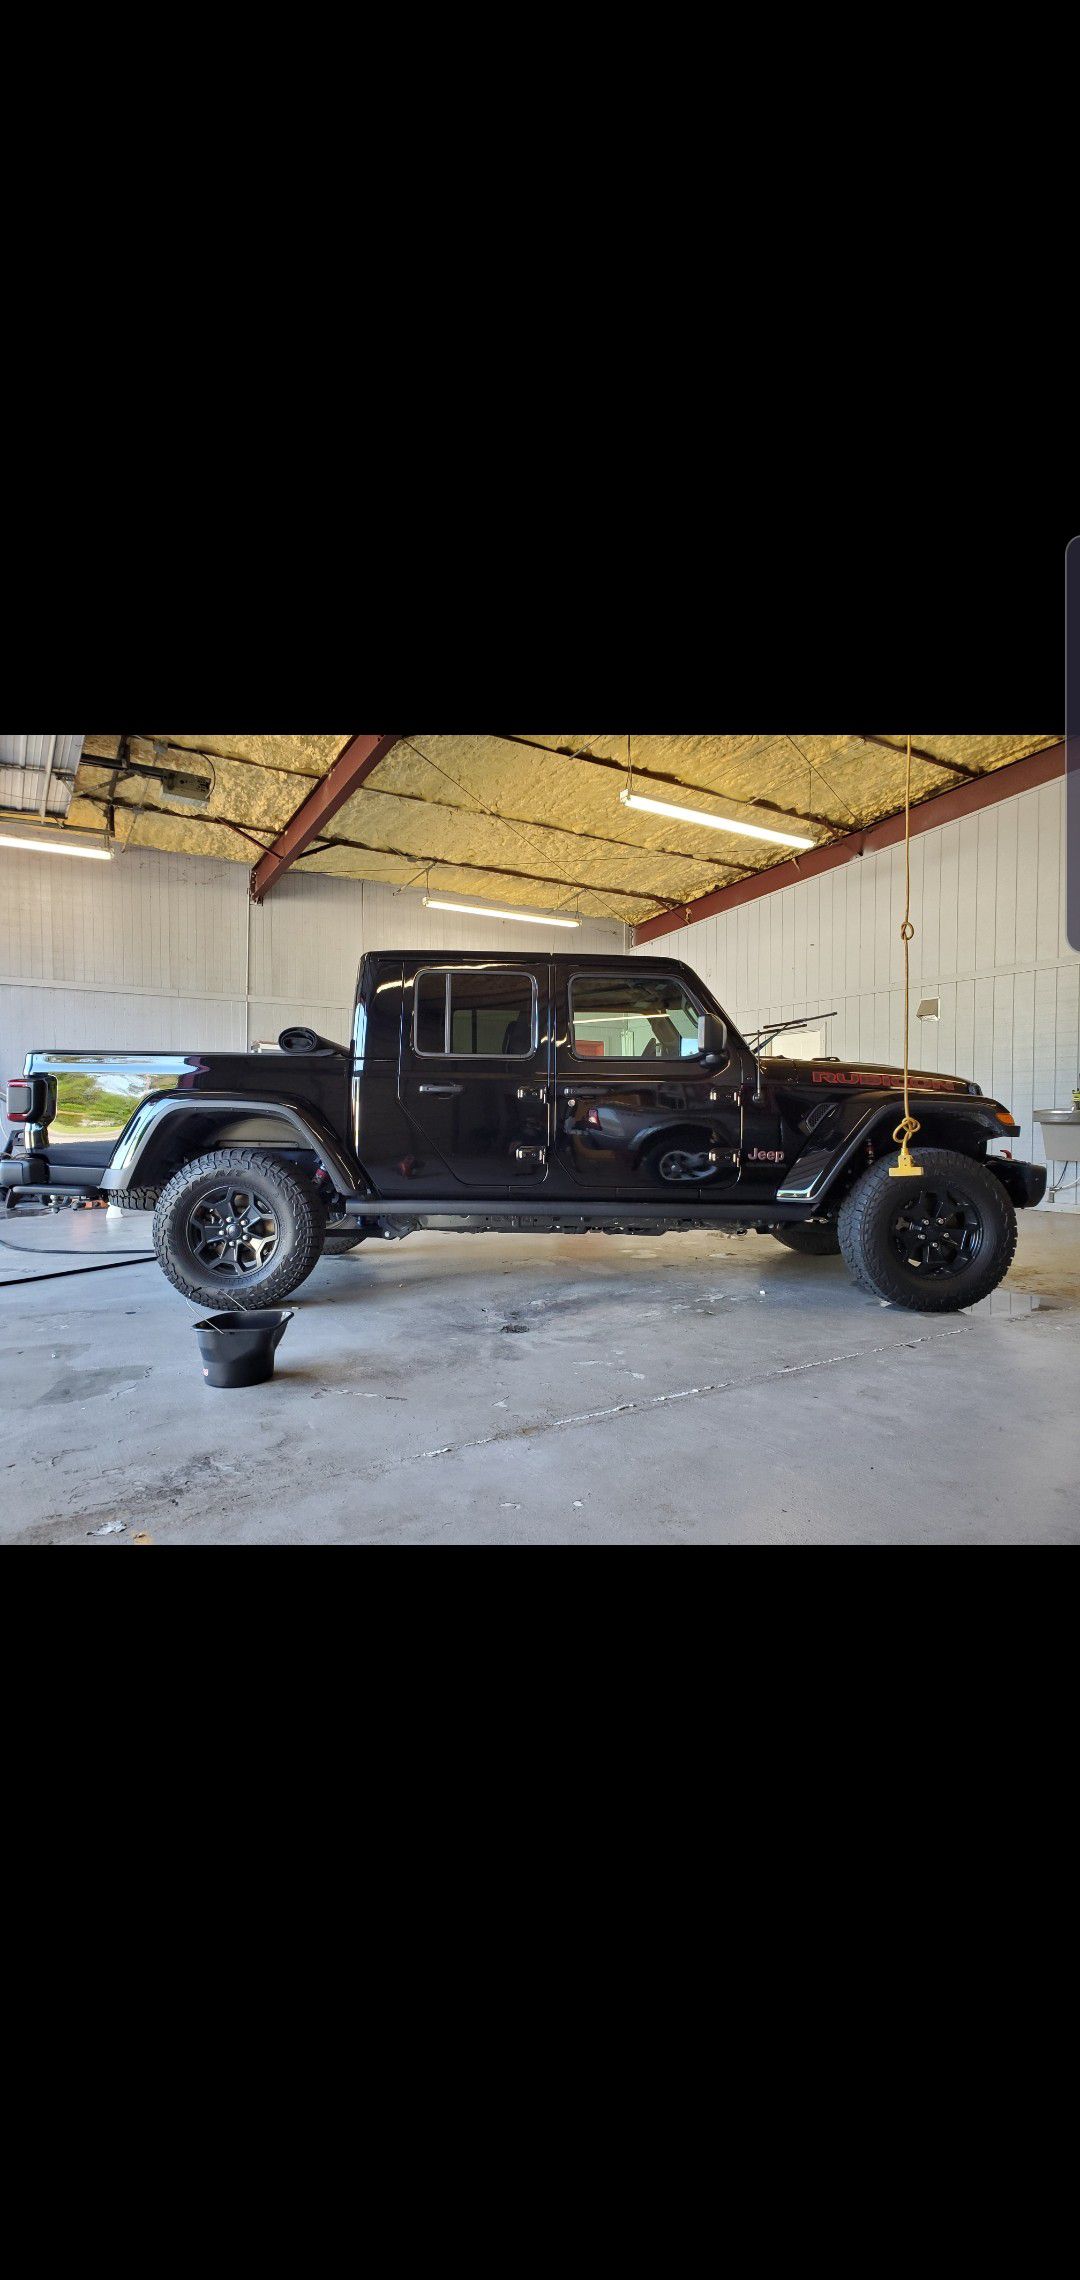 Jeep Gladiator Launch edition wheels, 17" rims and tires 33" tire